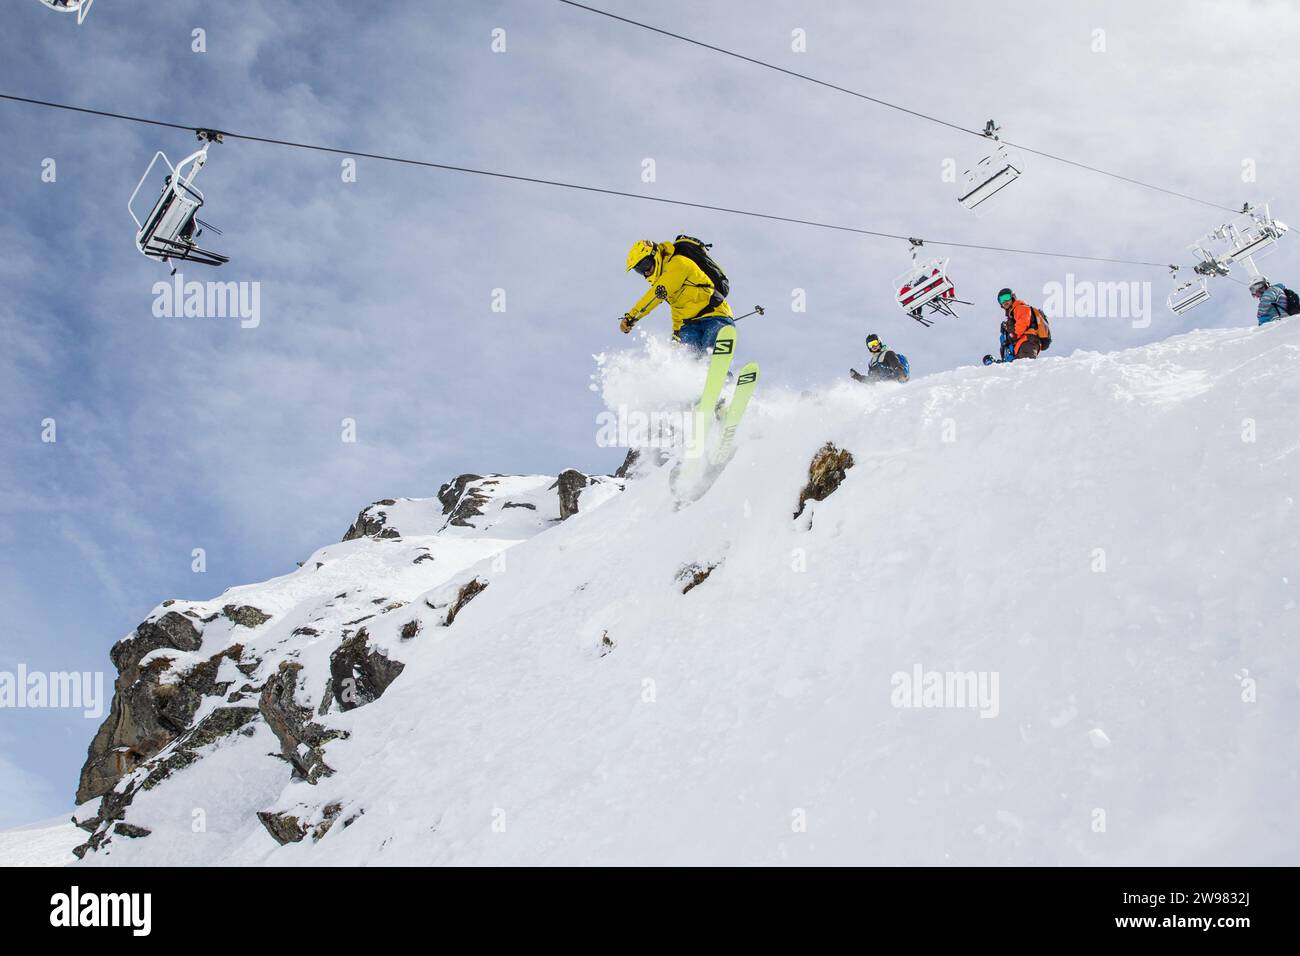 Pro rider giving a workshop on freeride competition skiing and choosing you line wisely. Here he is simply jumping into the subject. Stock Photo